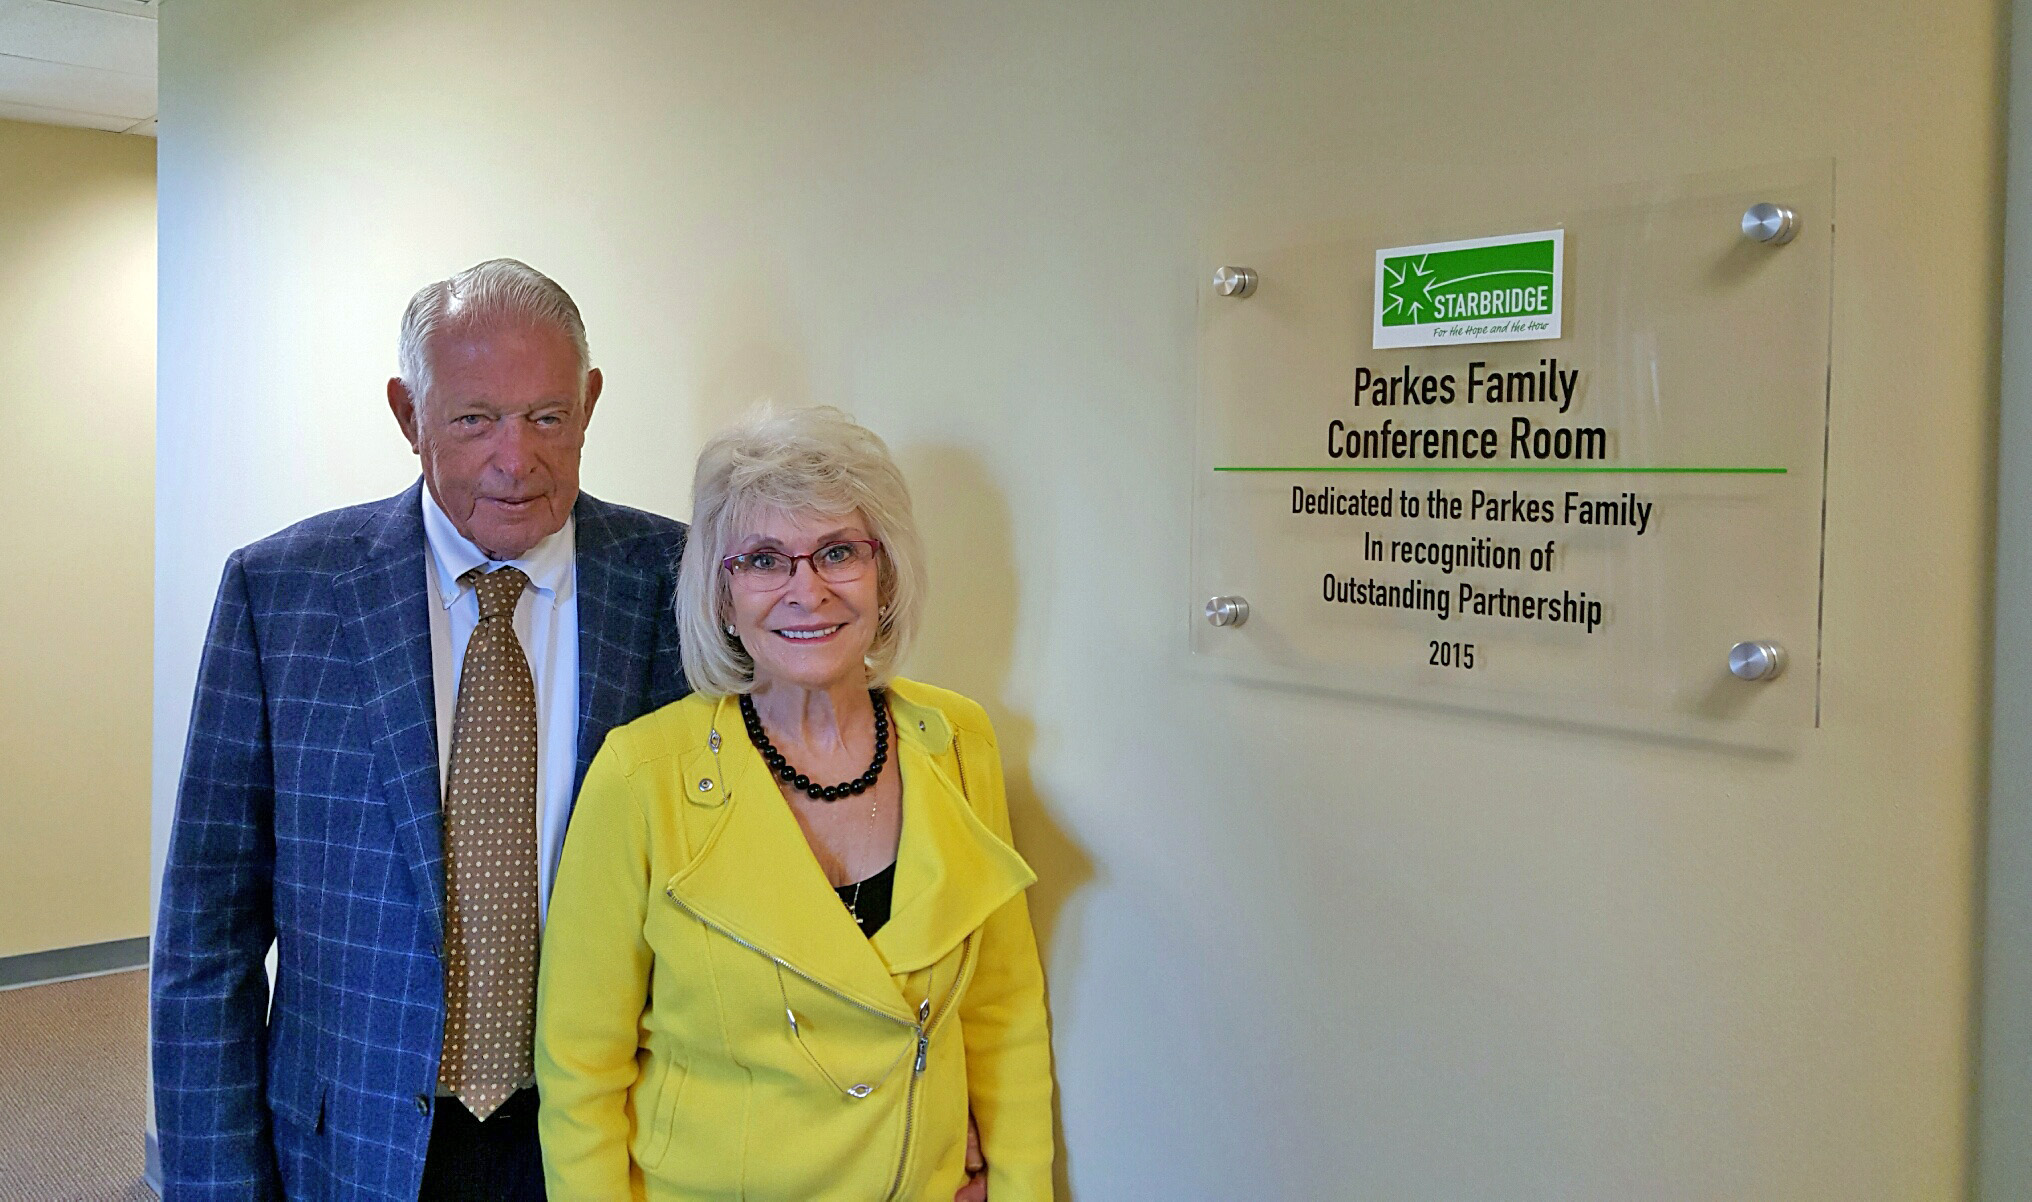 Walter and Barbara Parkes outside the Parkes Family Conference Room at Starbridge's main office